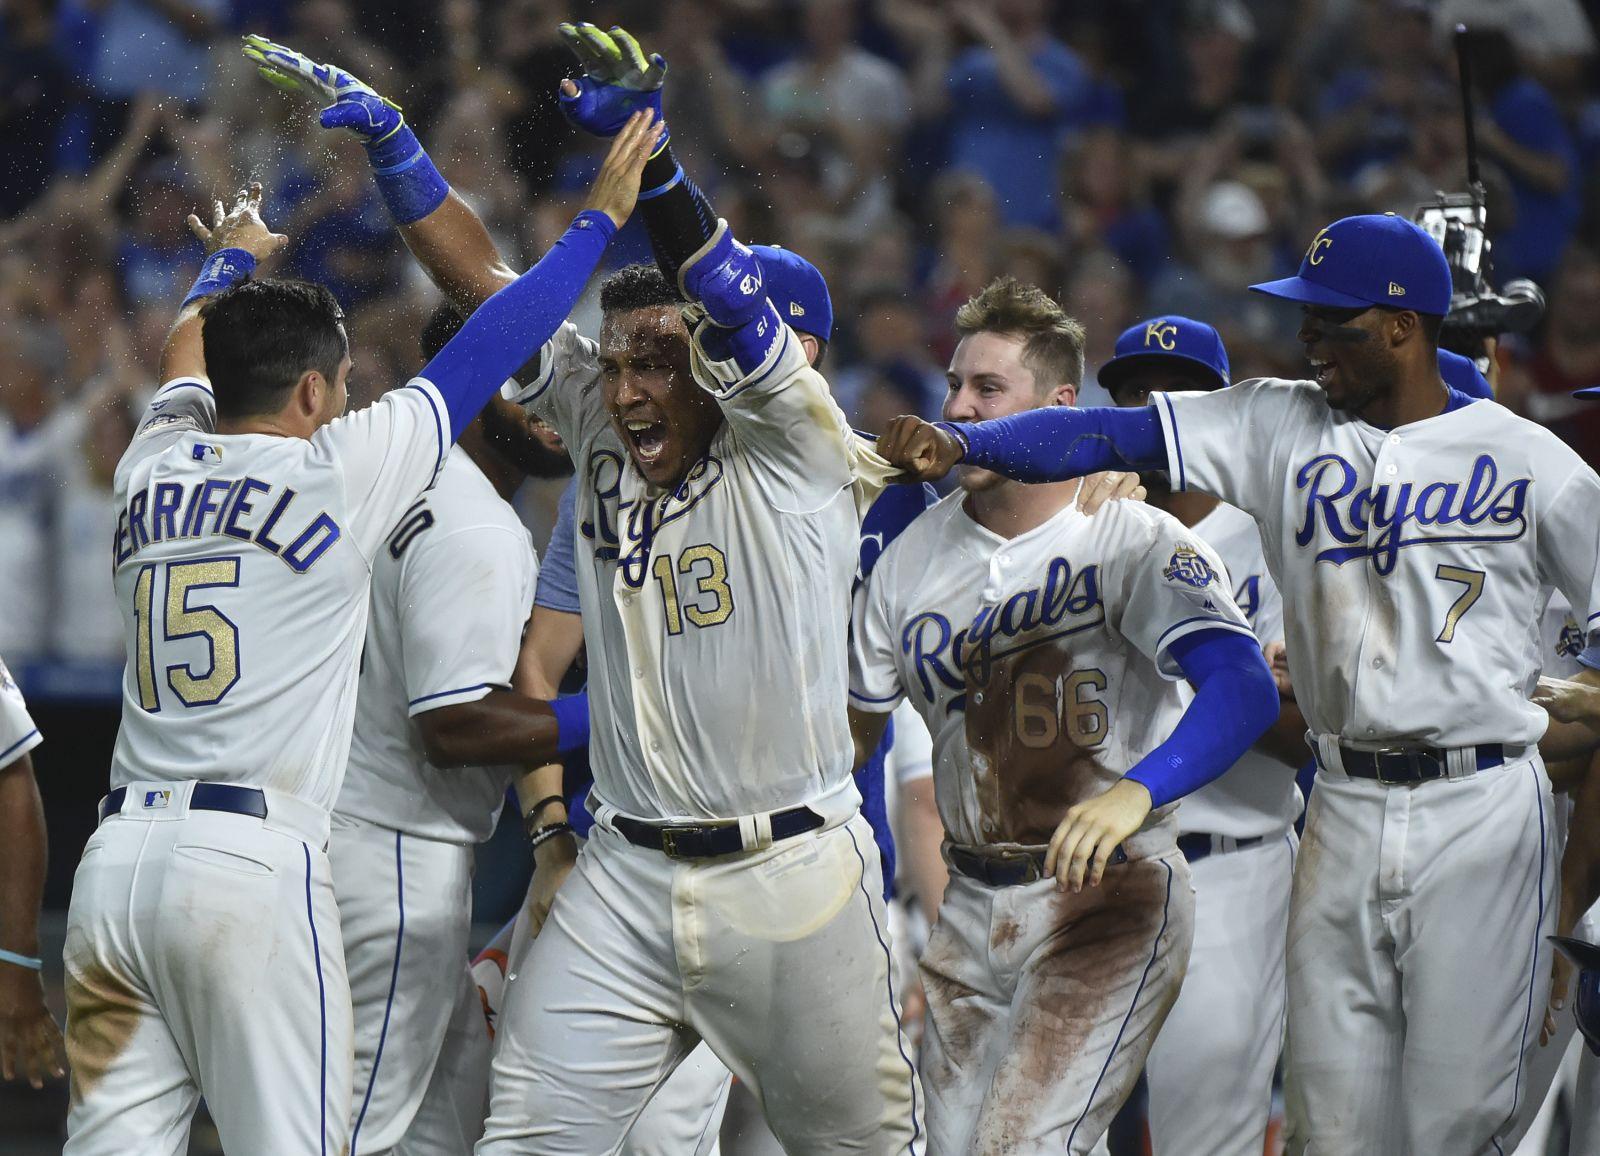 Kansas City Royals: Which player could help better the 2019 Royals?